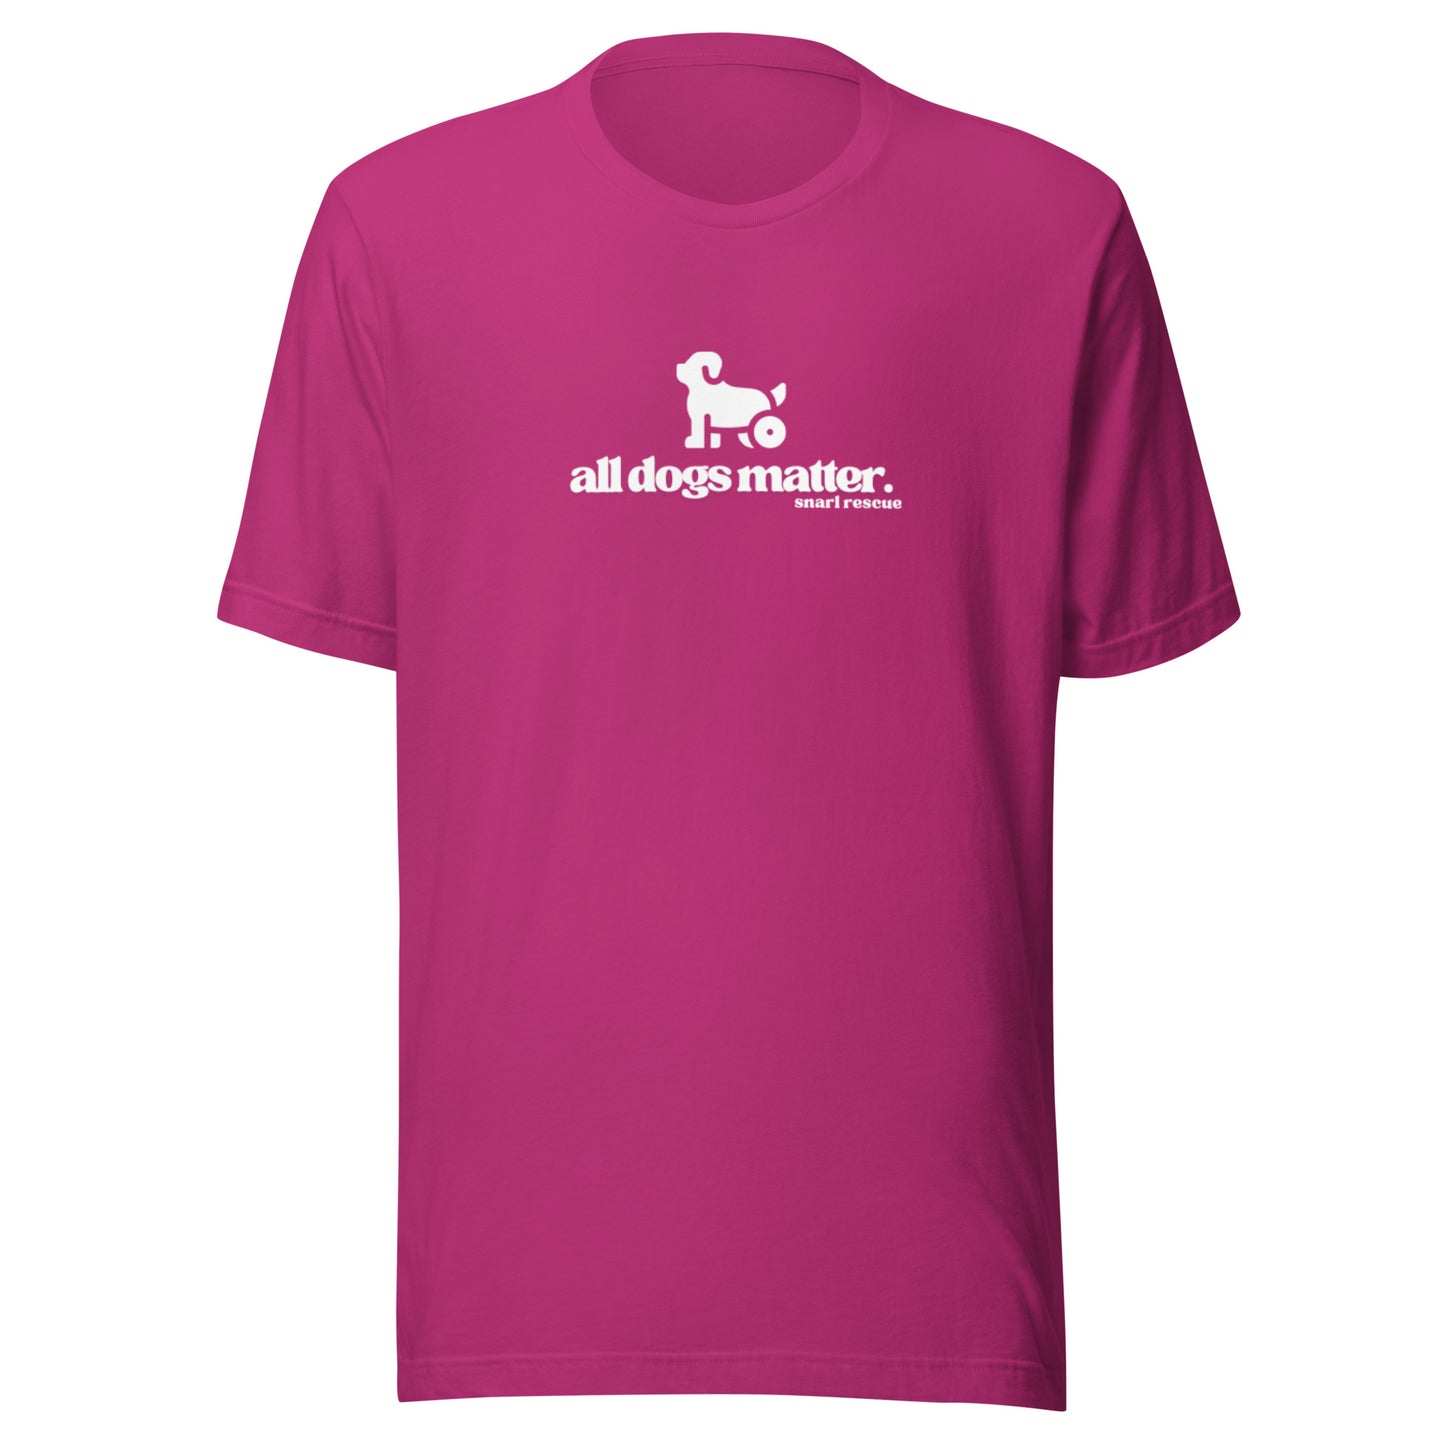 The All Dogs Matter Tee